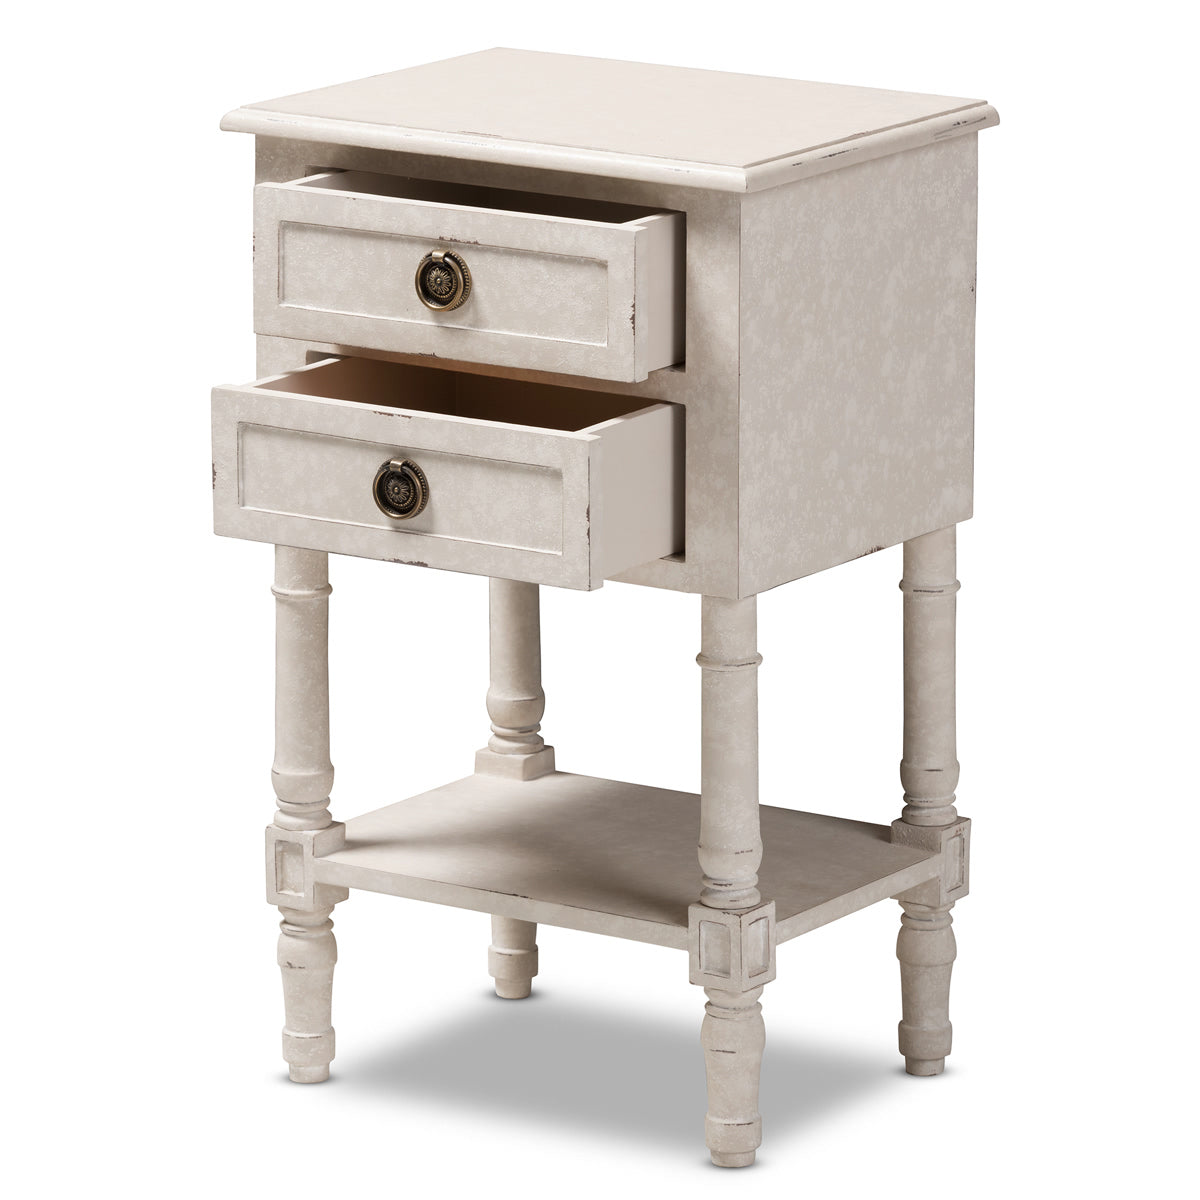 Baxton Studio Lenore Country Cottage Farmhouse Whitewashed 2-Drawer Nightstand Baxton Studio-nightstands-Minimal And Modern - 5